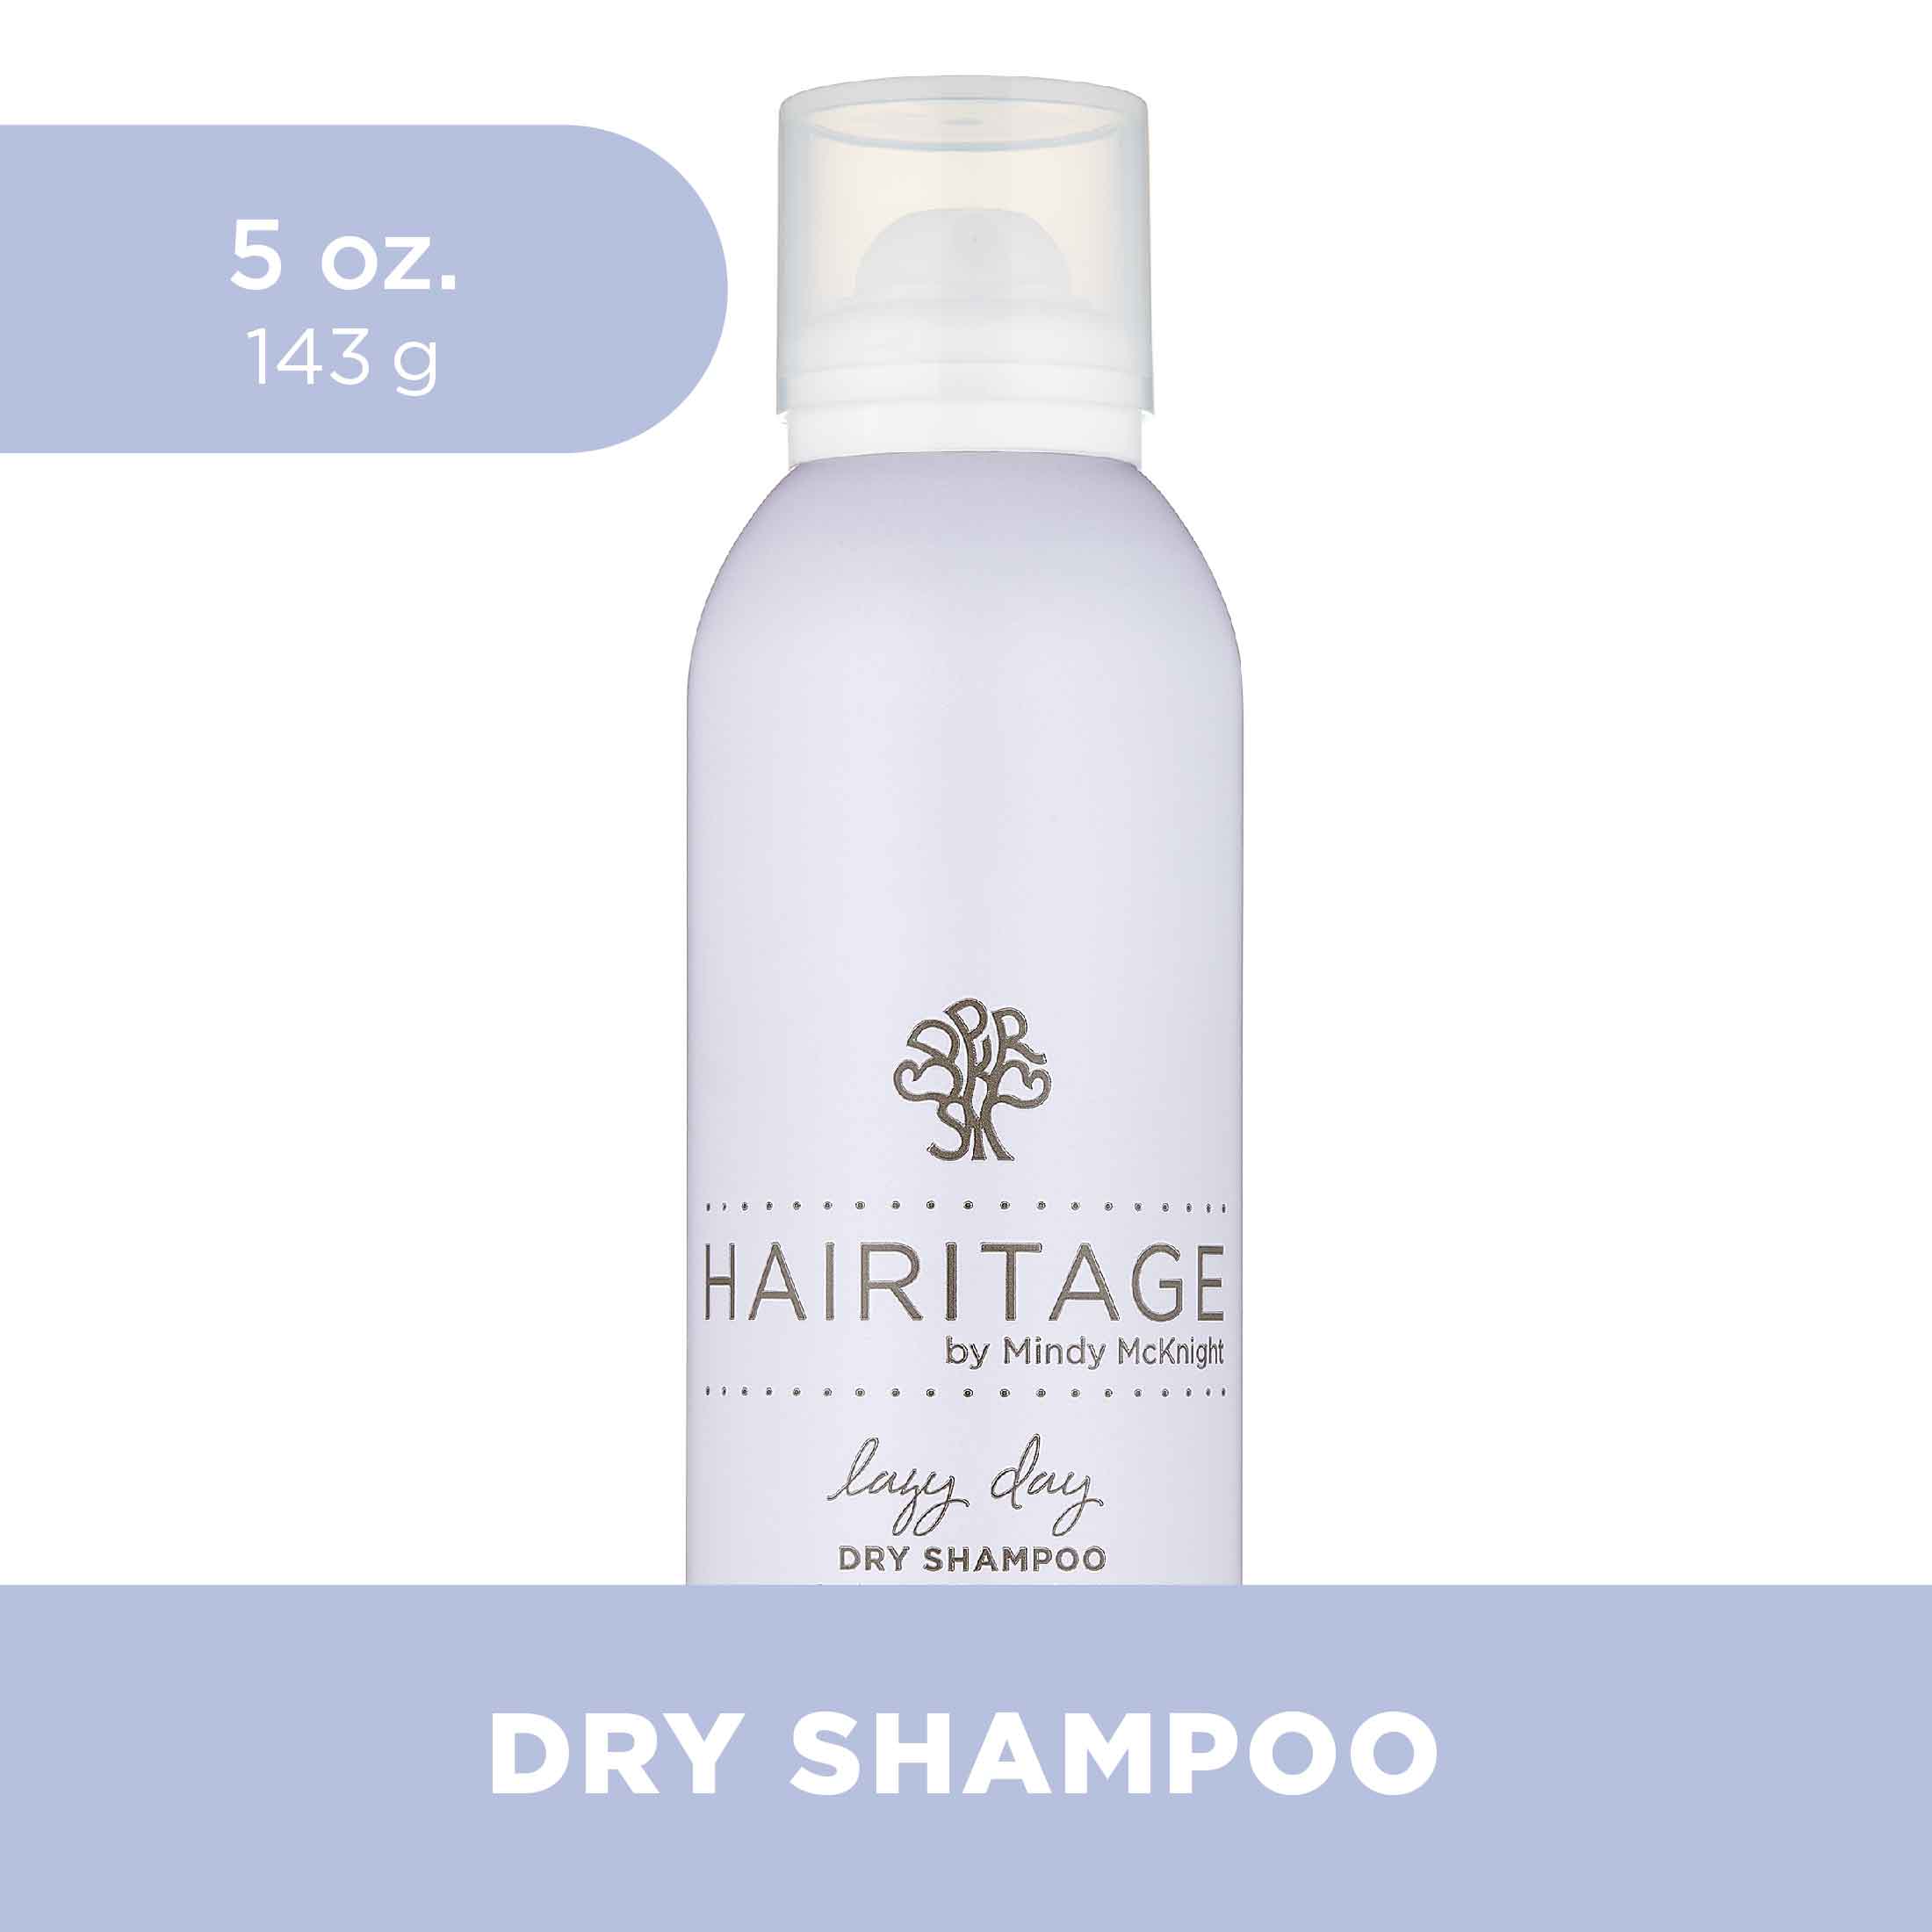 Hairitage Lazy Day Dry Shampoo | Oil Absorbing + Odors |Adds  Texture + Volume | Volcanic Minerals + Rice Starch | Vegan | 5oz - image 1 of 7